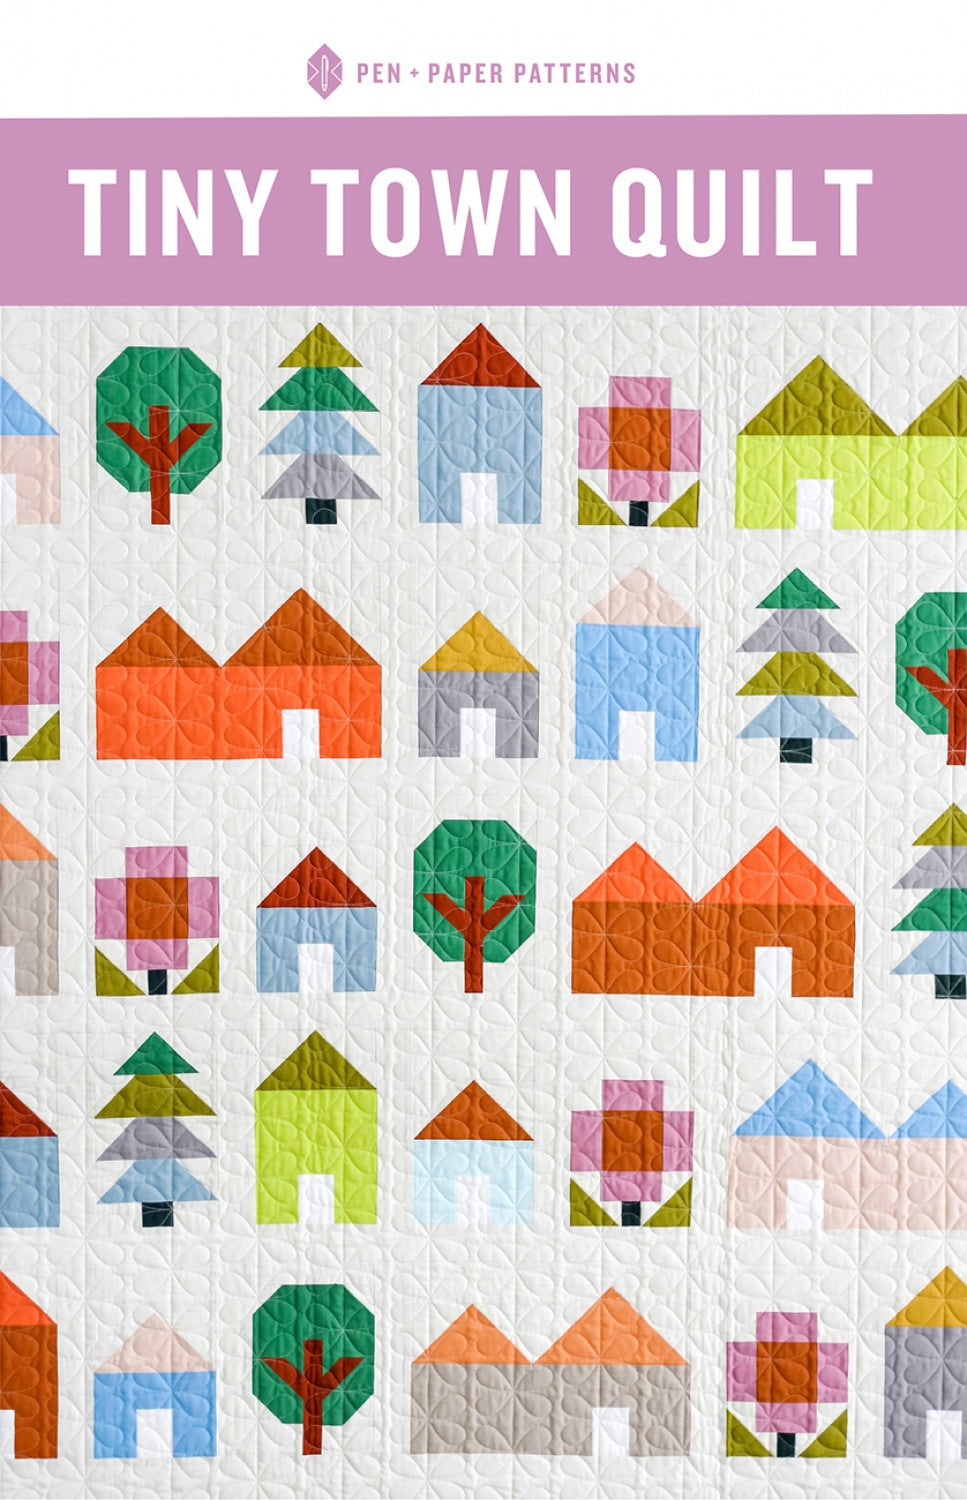 Tiny Town Quilt Pattern by Pen and Paper Patterns  (Physical Copy)